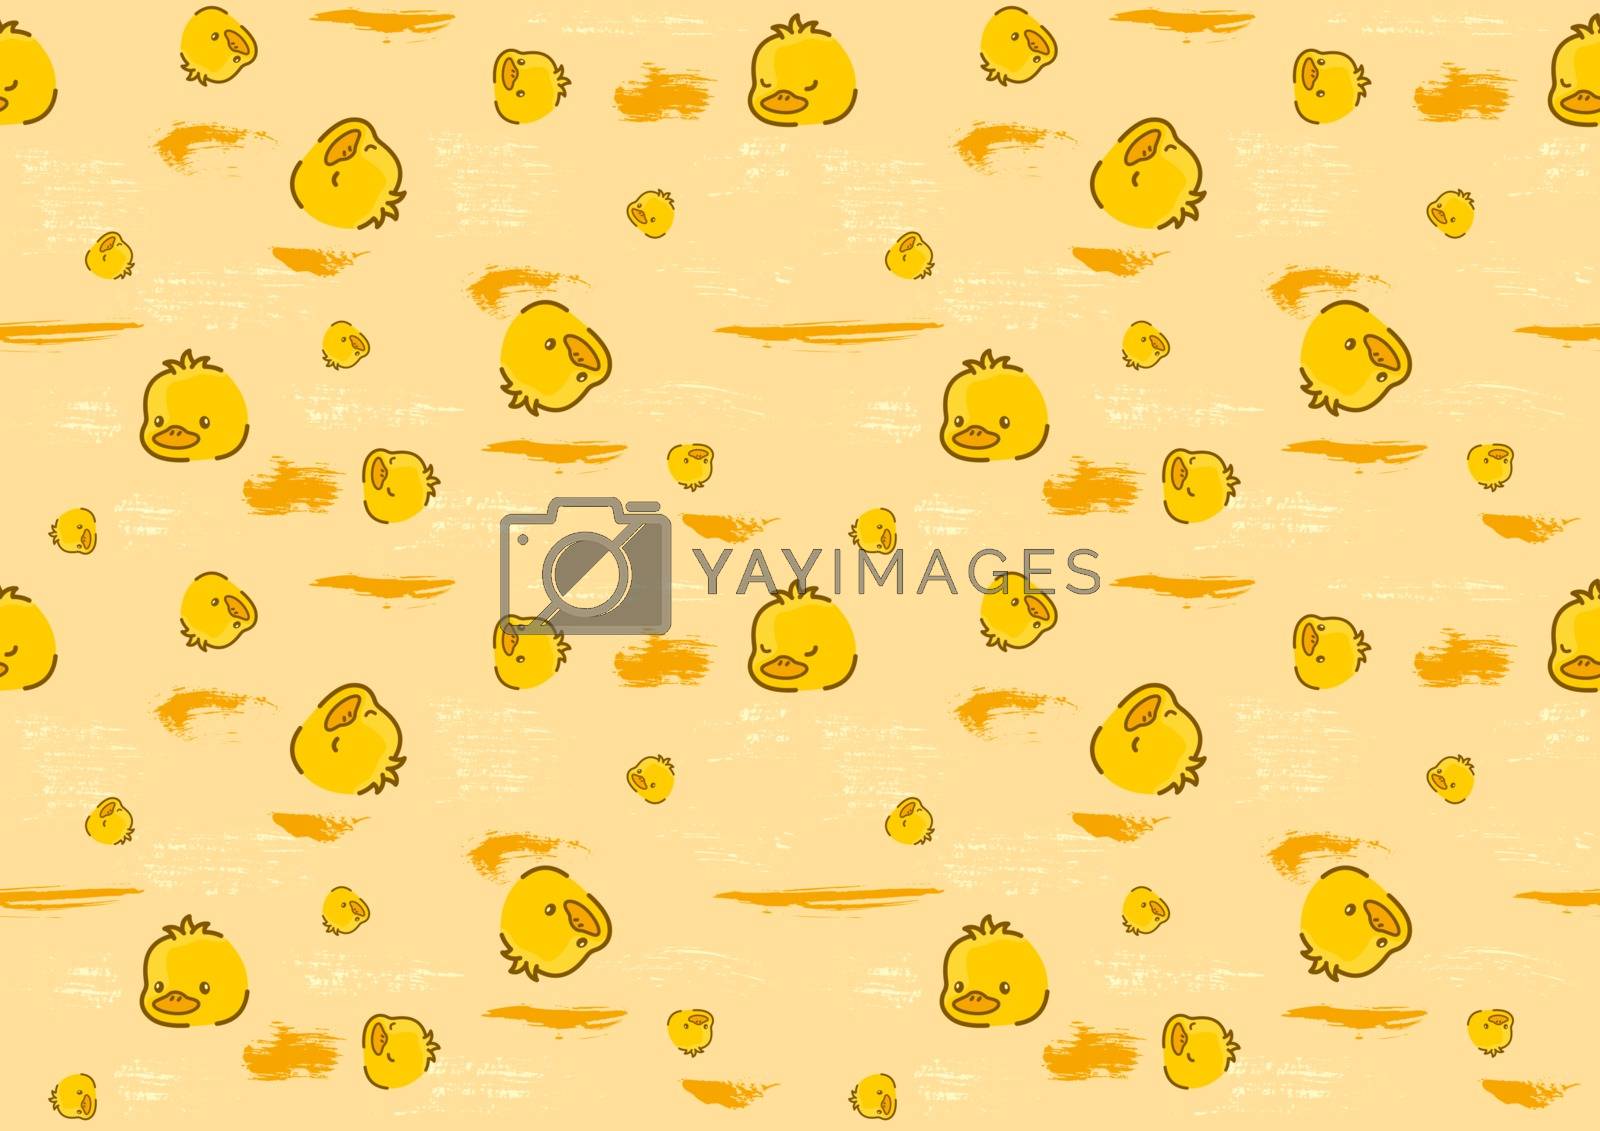 Royalty free image of Seamless Baby Pattern with Duck by illustratorCZ